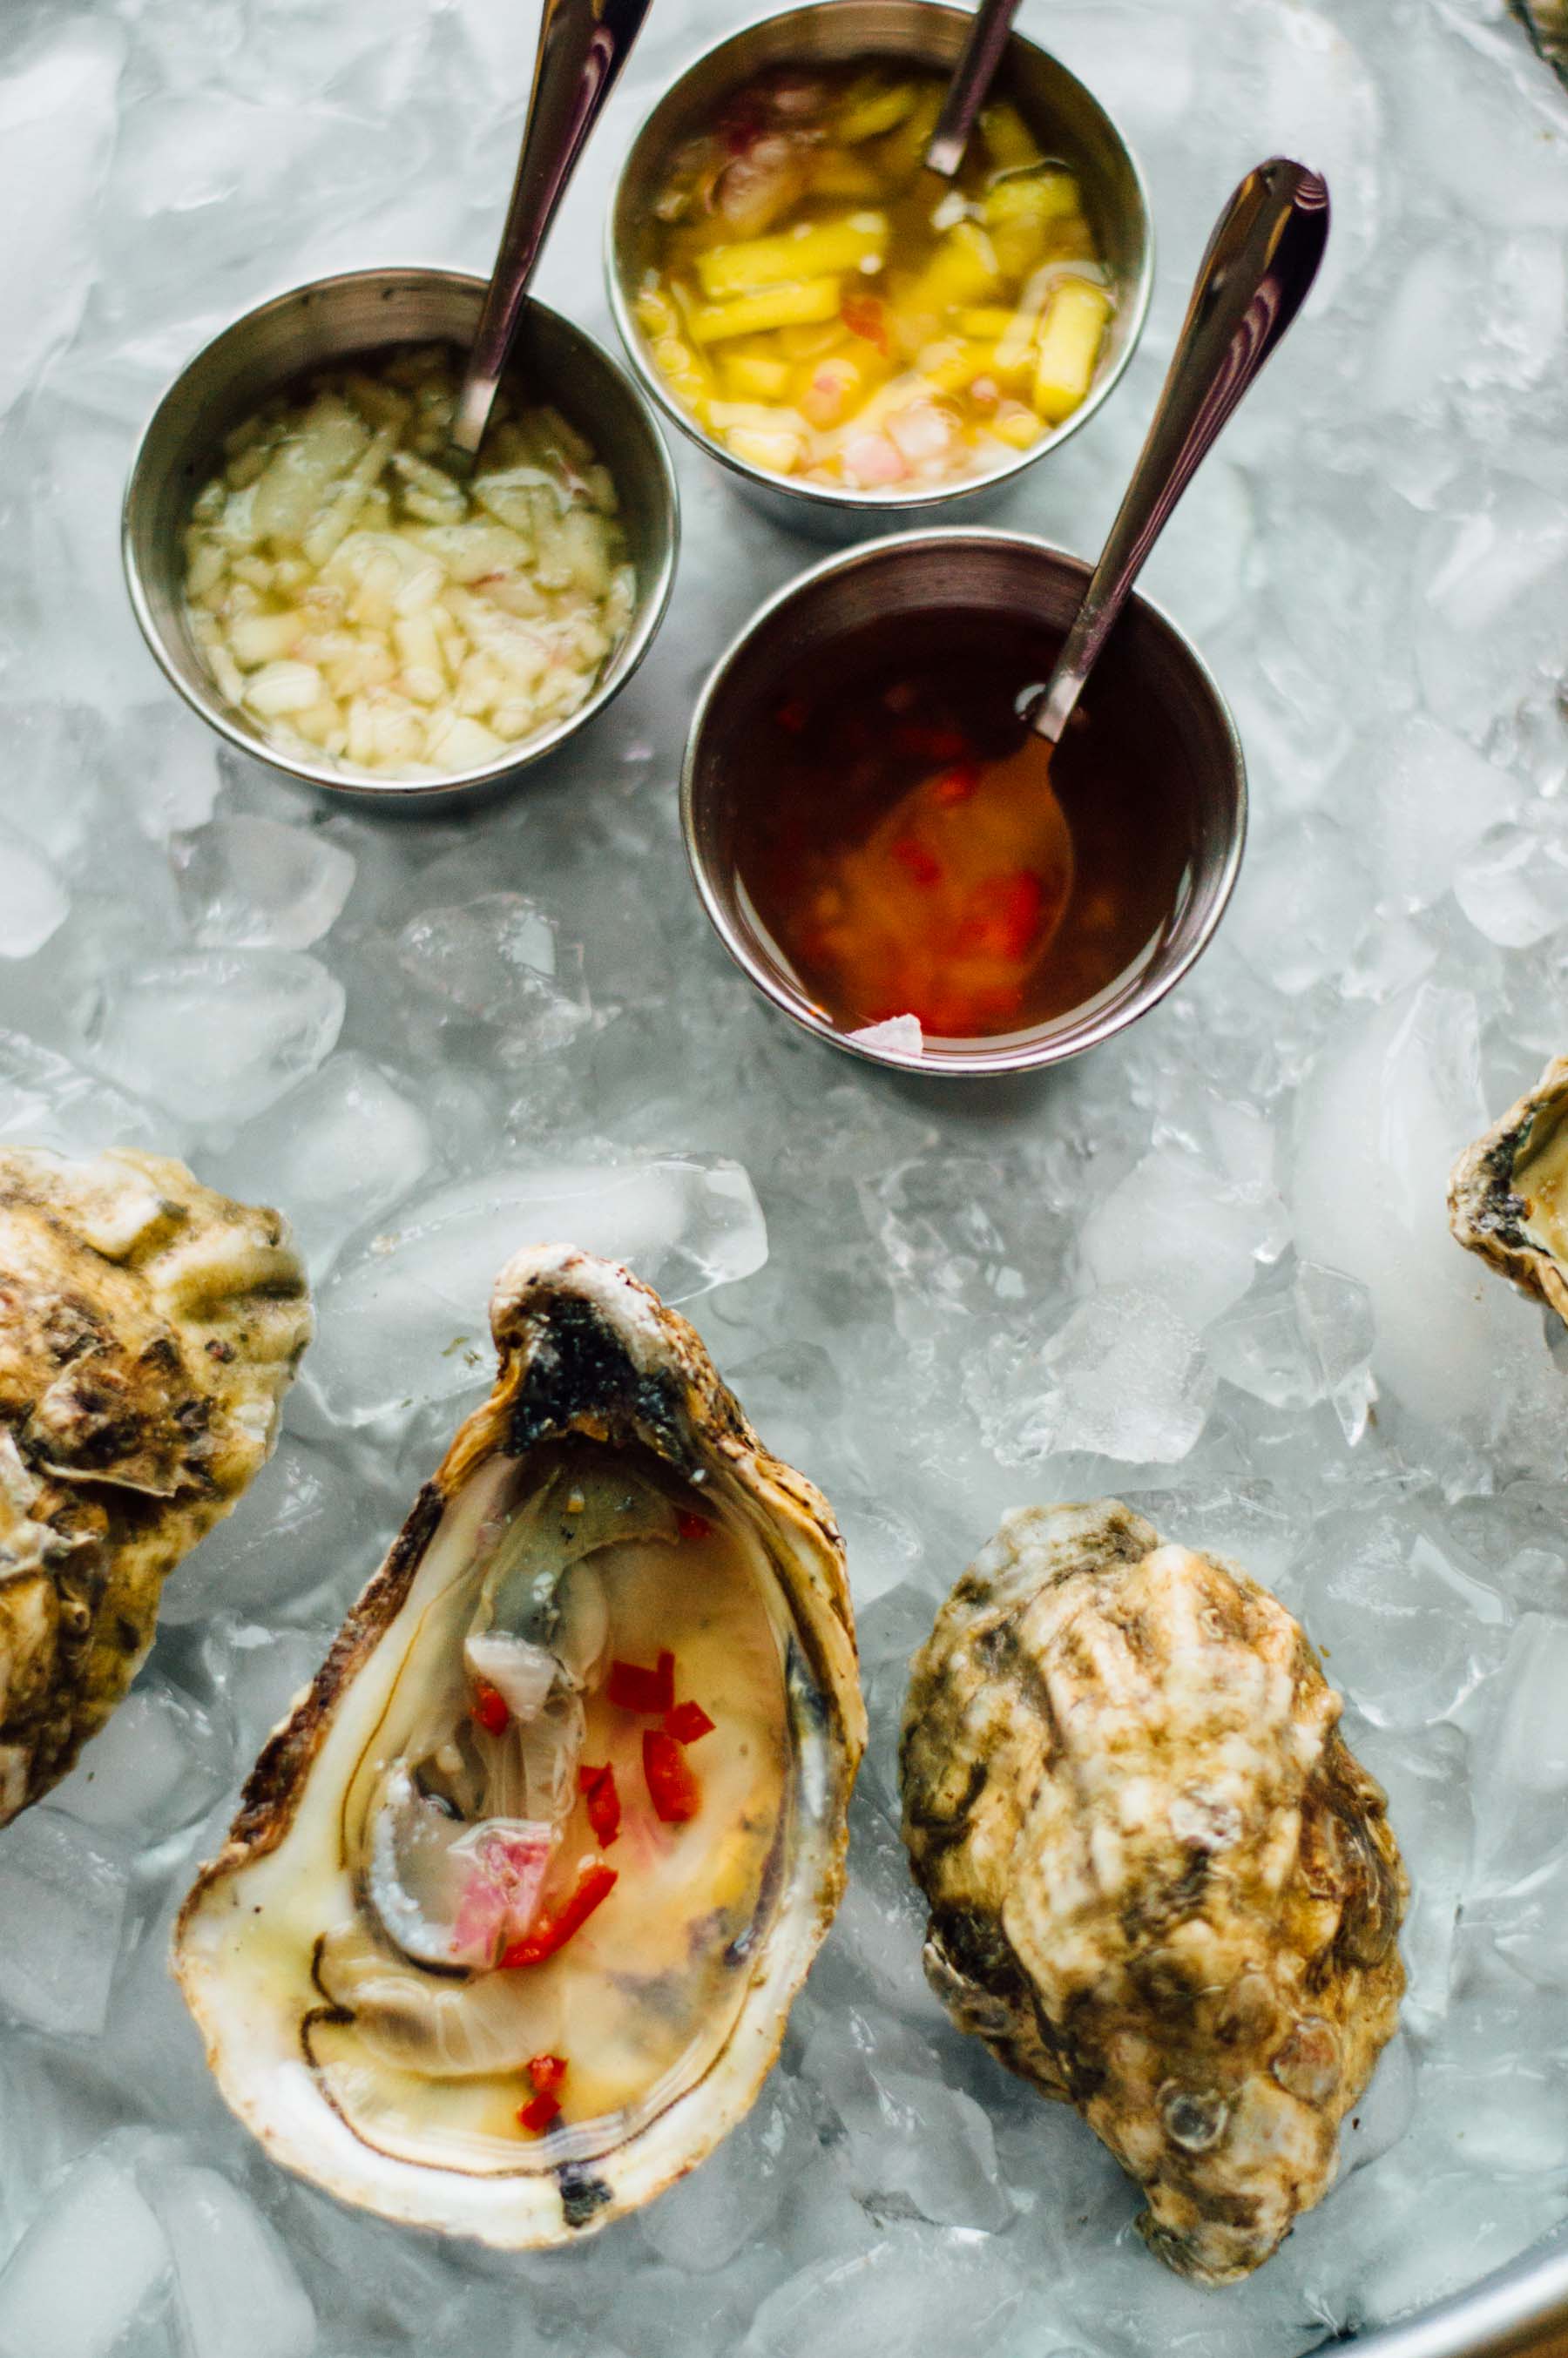 How to throw your own little indoor oyster fest with 3 mignonette recipes and Hoegaarden beer | bygabriella.co